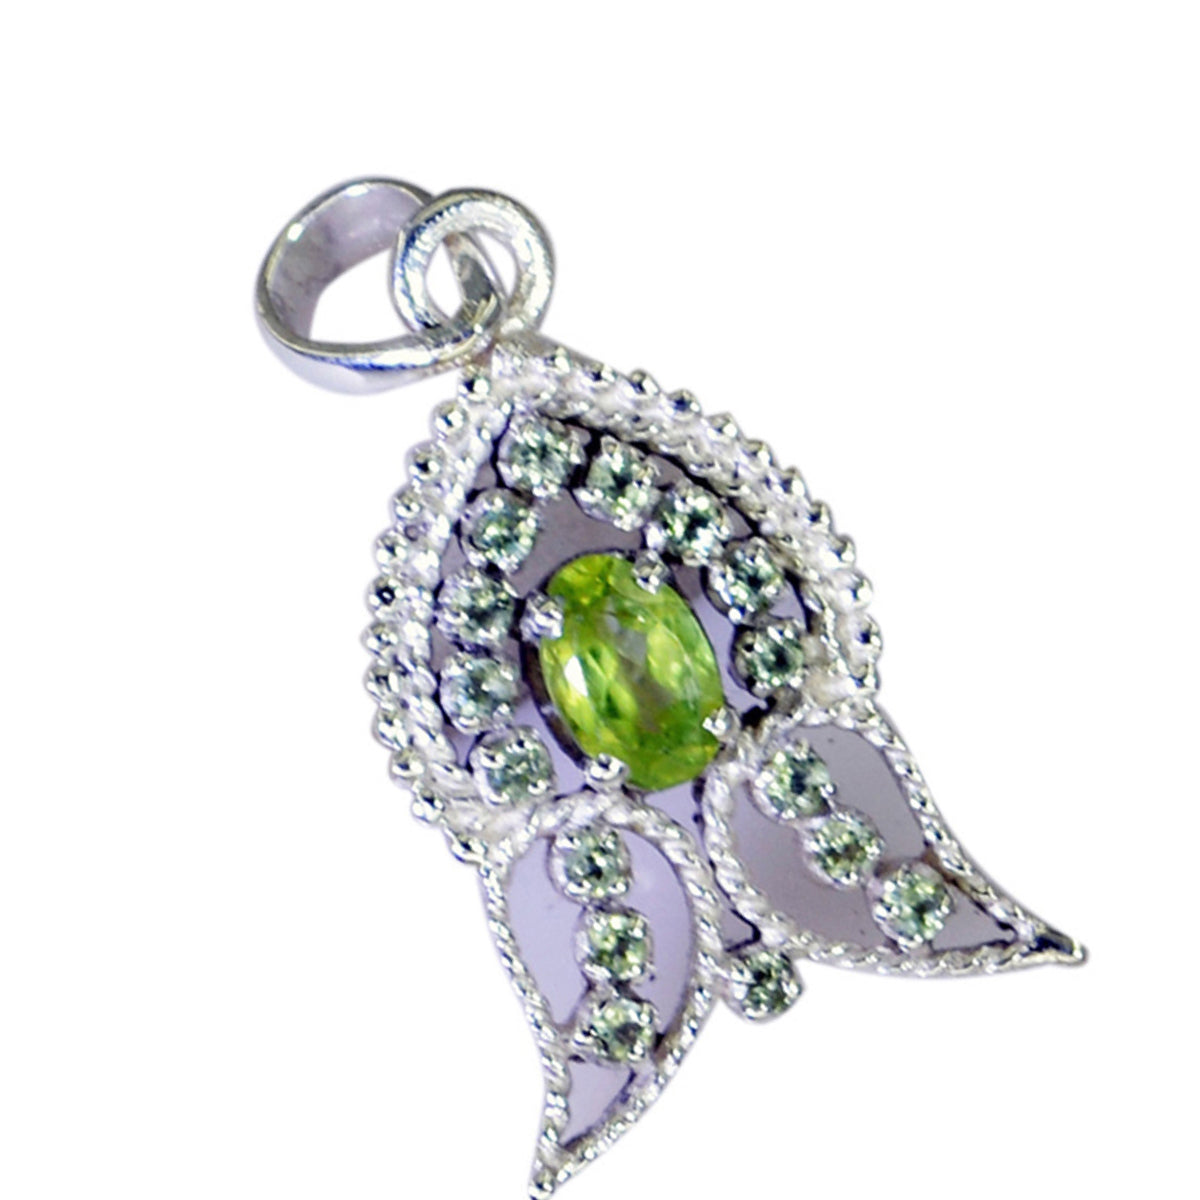 Riyo Easy Gemstone Round Faceted Green Peridot 1122 Sterling Silver Pendant Gift For Good Friday